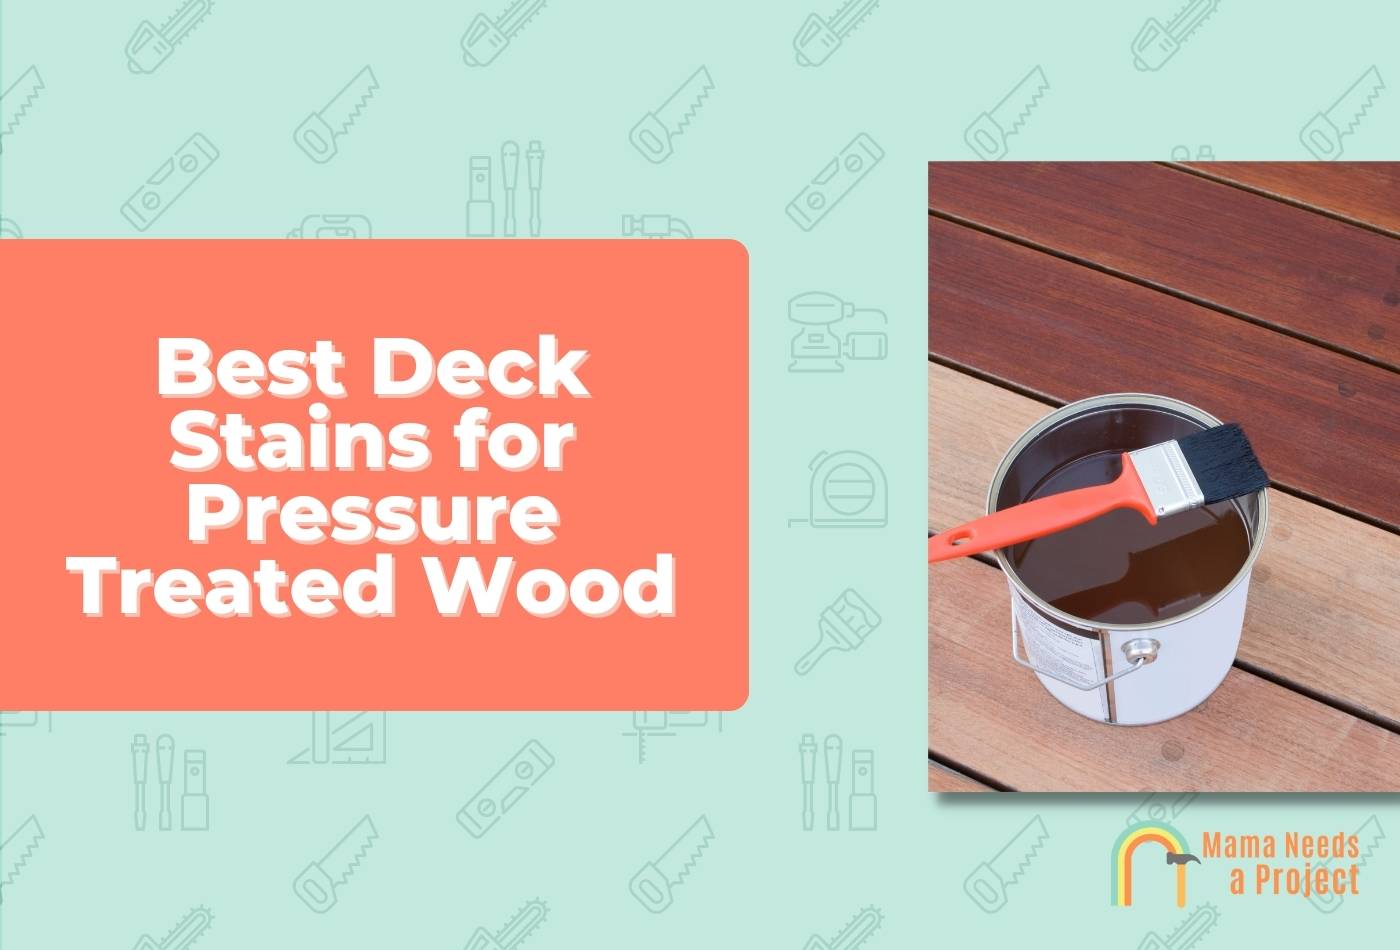 Top Deck Stains for Pressure Treated Wood